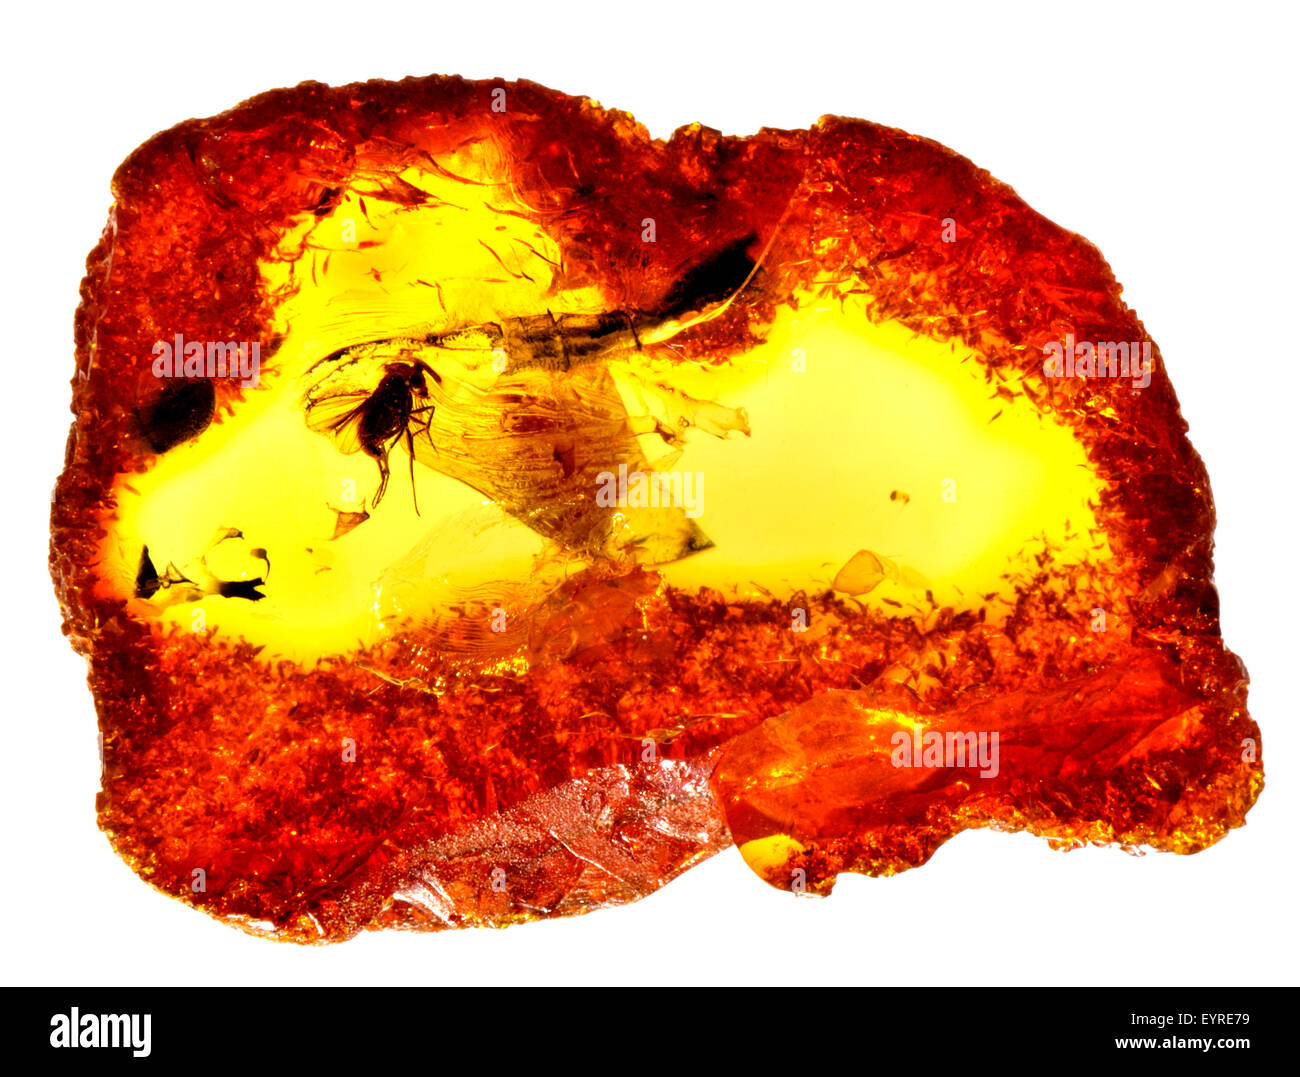 Prehistoric fly (c40-50m years old) preserved in Baltic amber from Kalingrad region, Russia. Insect 3-4mm long Stock Photo